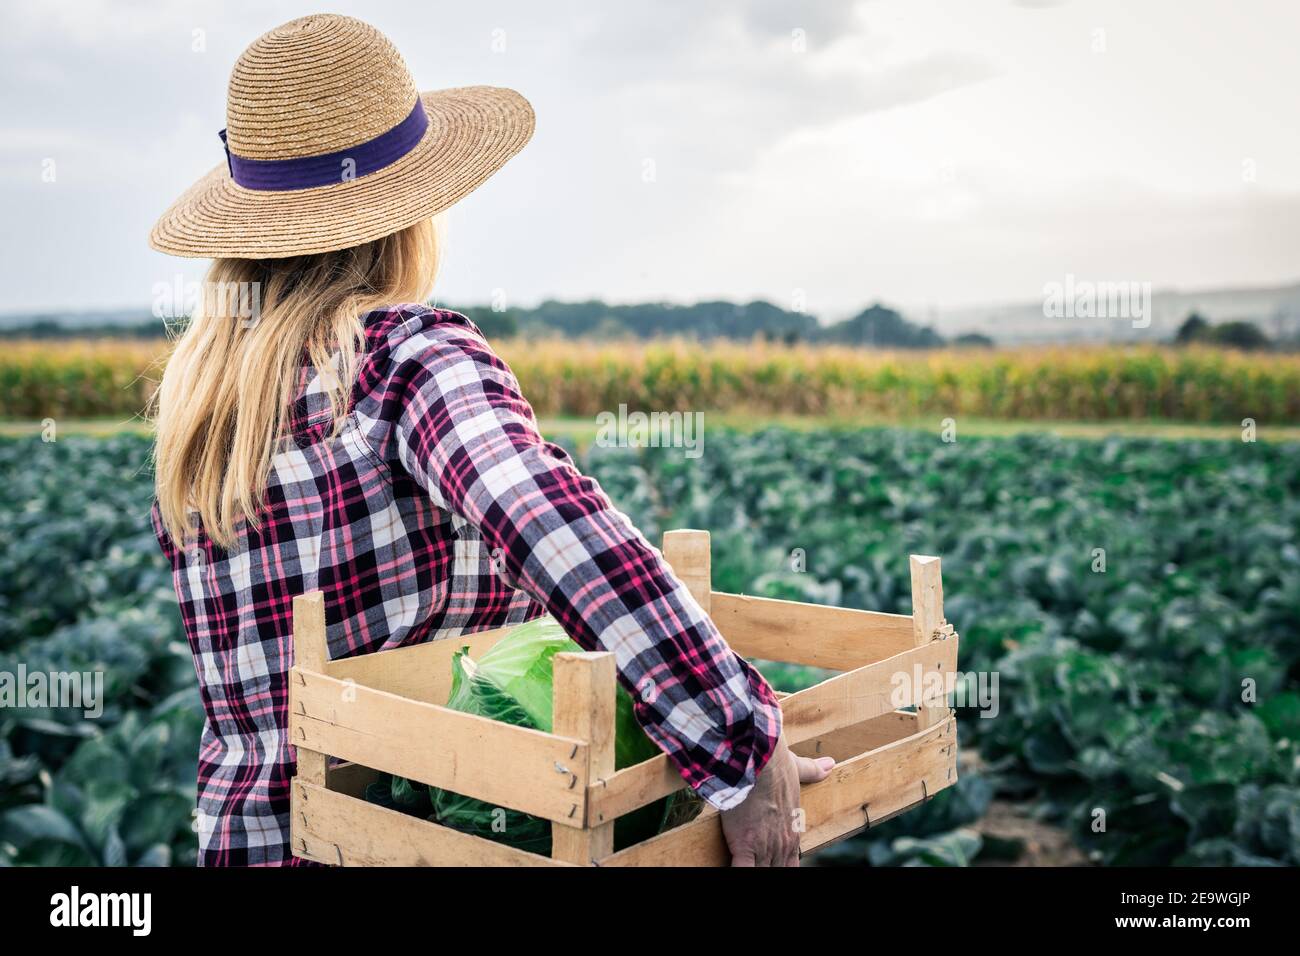 Woman harvesting cabbage at vegetable field. Female farmer with straw hat is holding wooden crate. Gardening and agricultural activity during autumn s Stock Photo